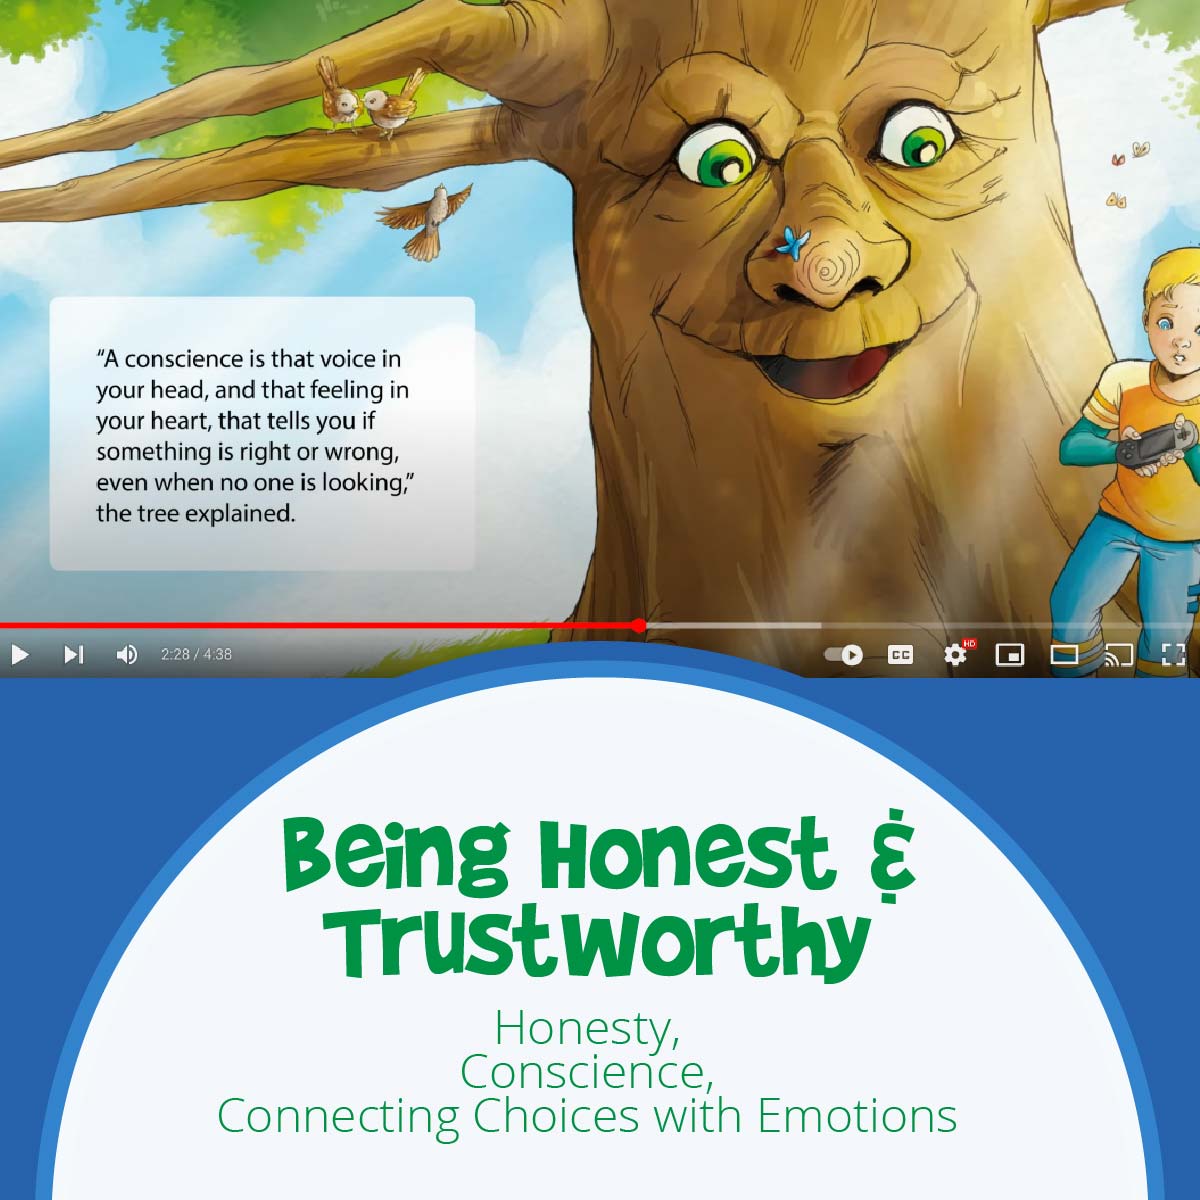 Be Proud- A good character and values video on honesty, conscience, forgiveness